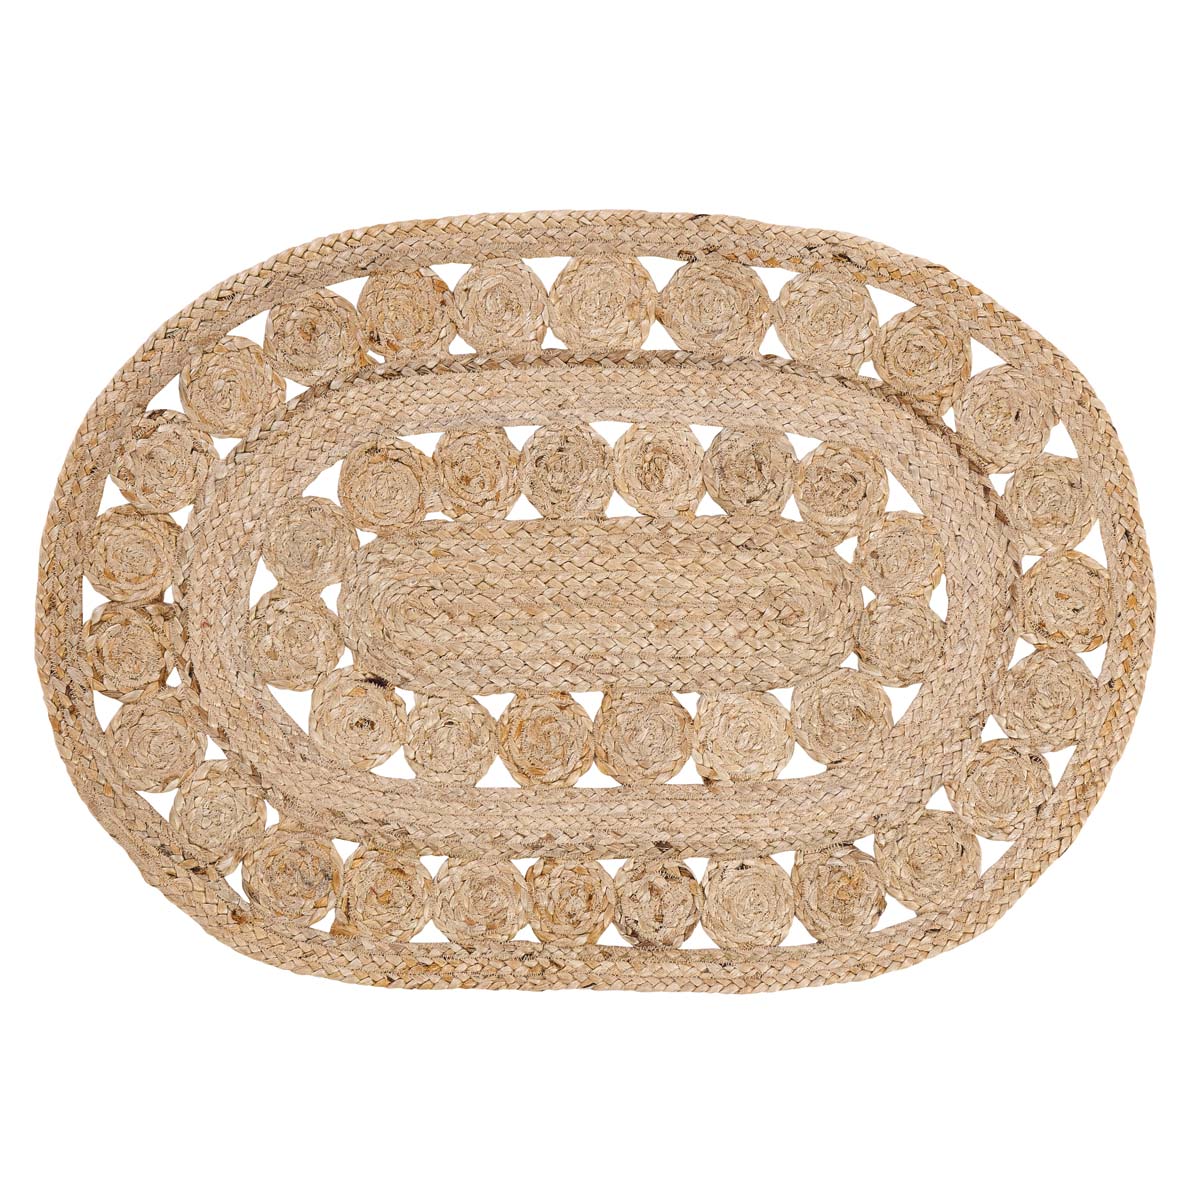 Celeste Jute Rug Oval Jute Braided Rug Oval 20"x30" with Rug Pad VHC Brands